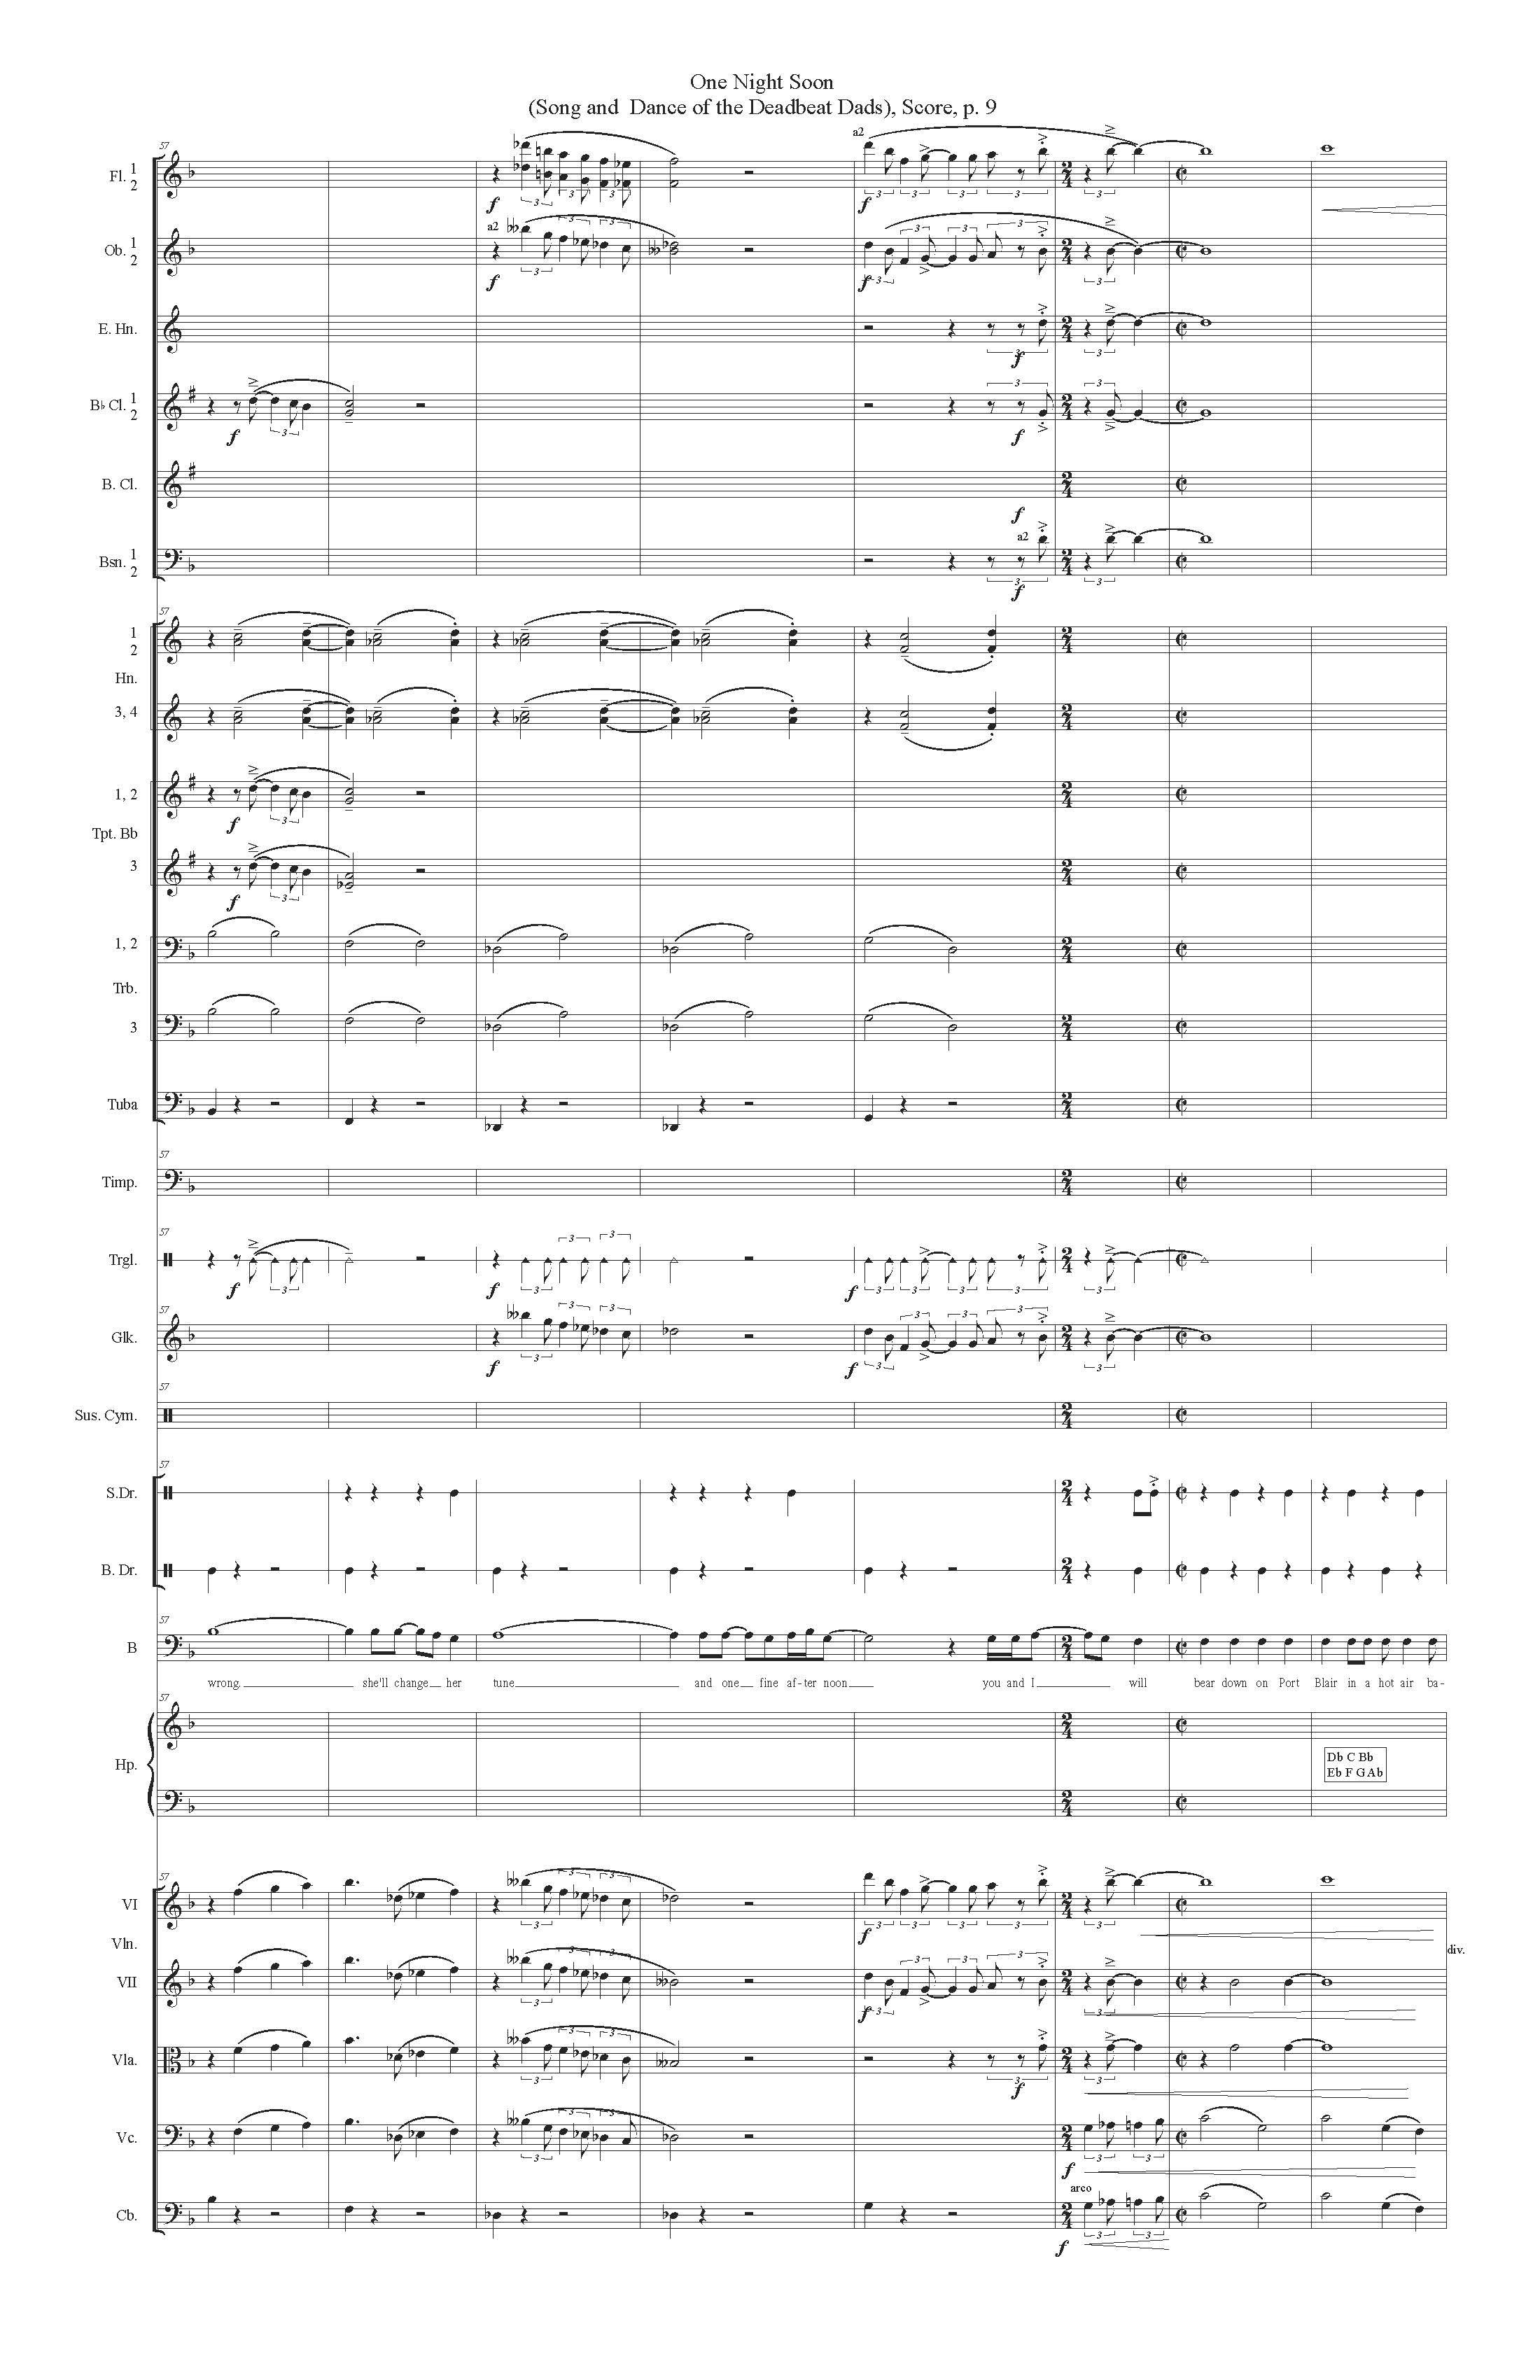 ONE NIGHT SOON ORCH - Score_Page_09.jpg